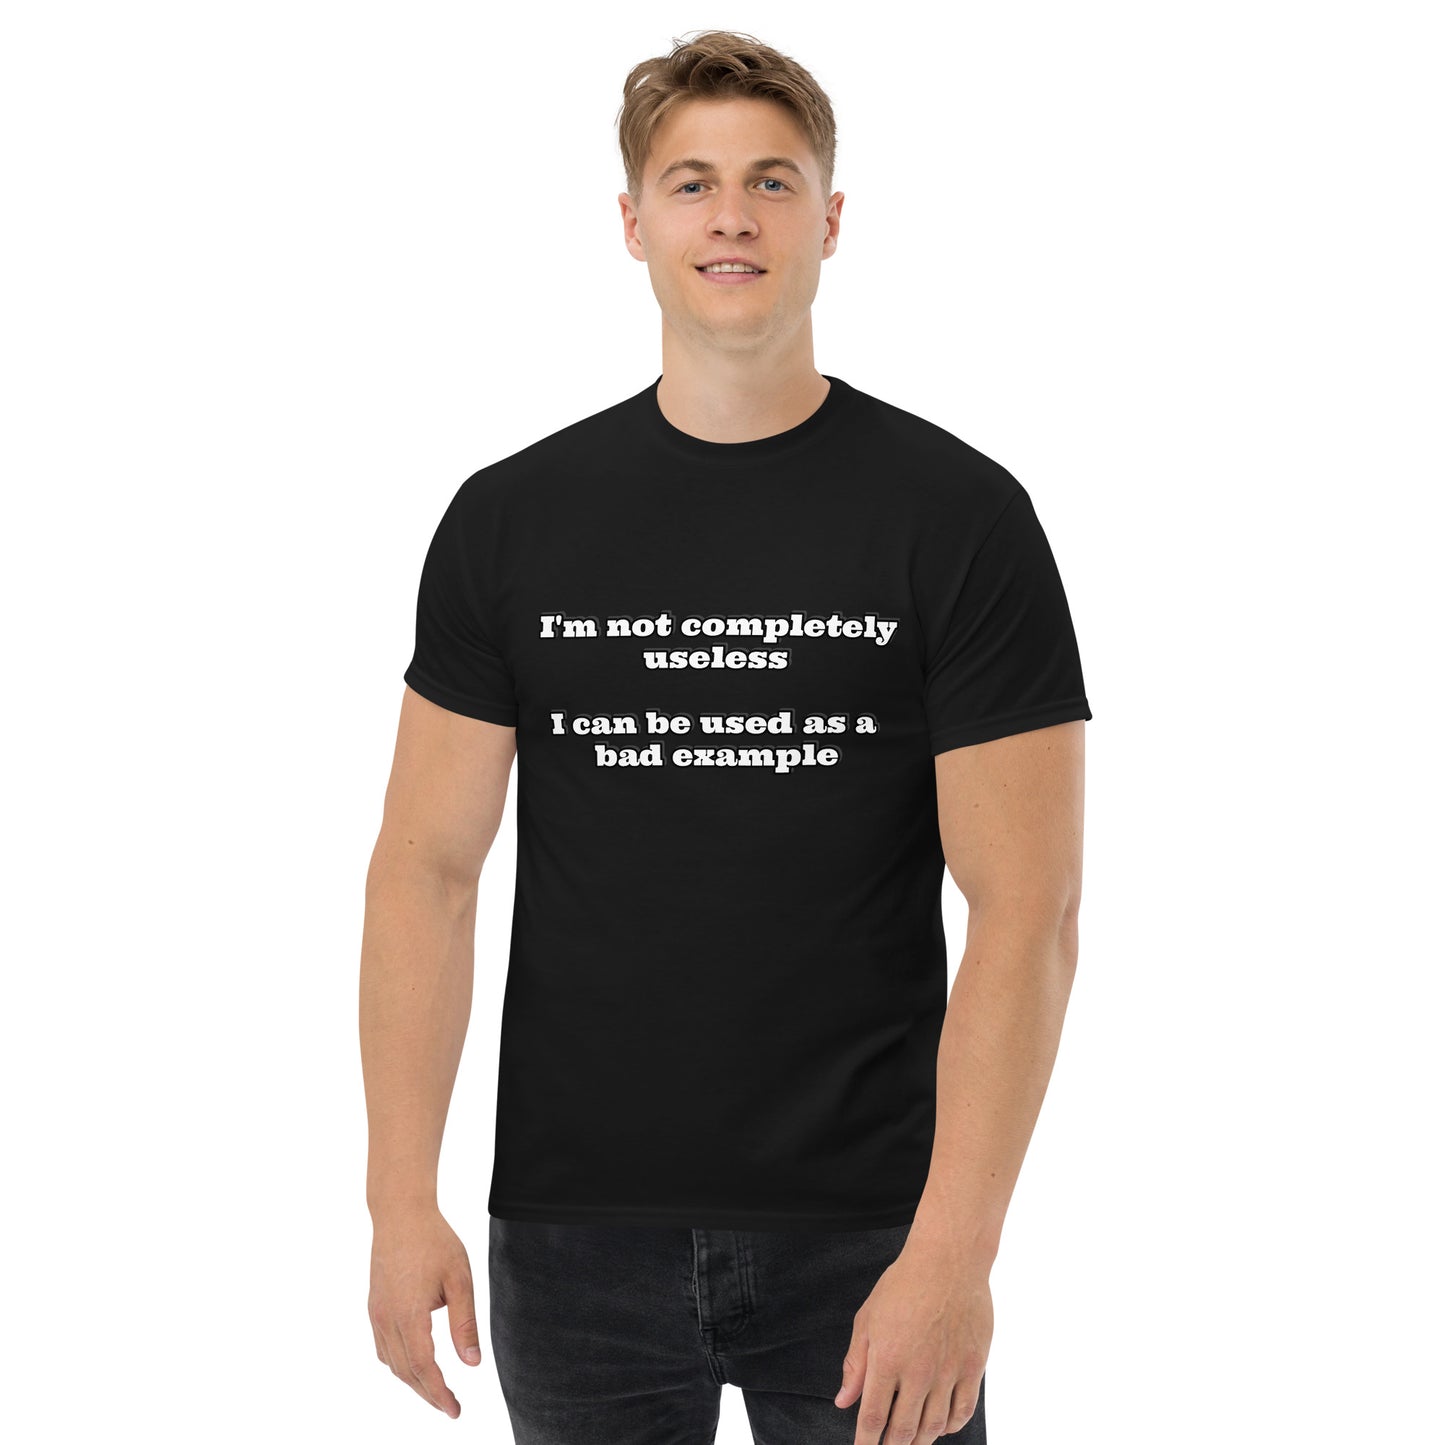 Men with black t-shirt with text “I'm not completely useless I can be used as a bad example”